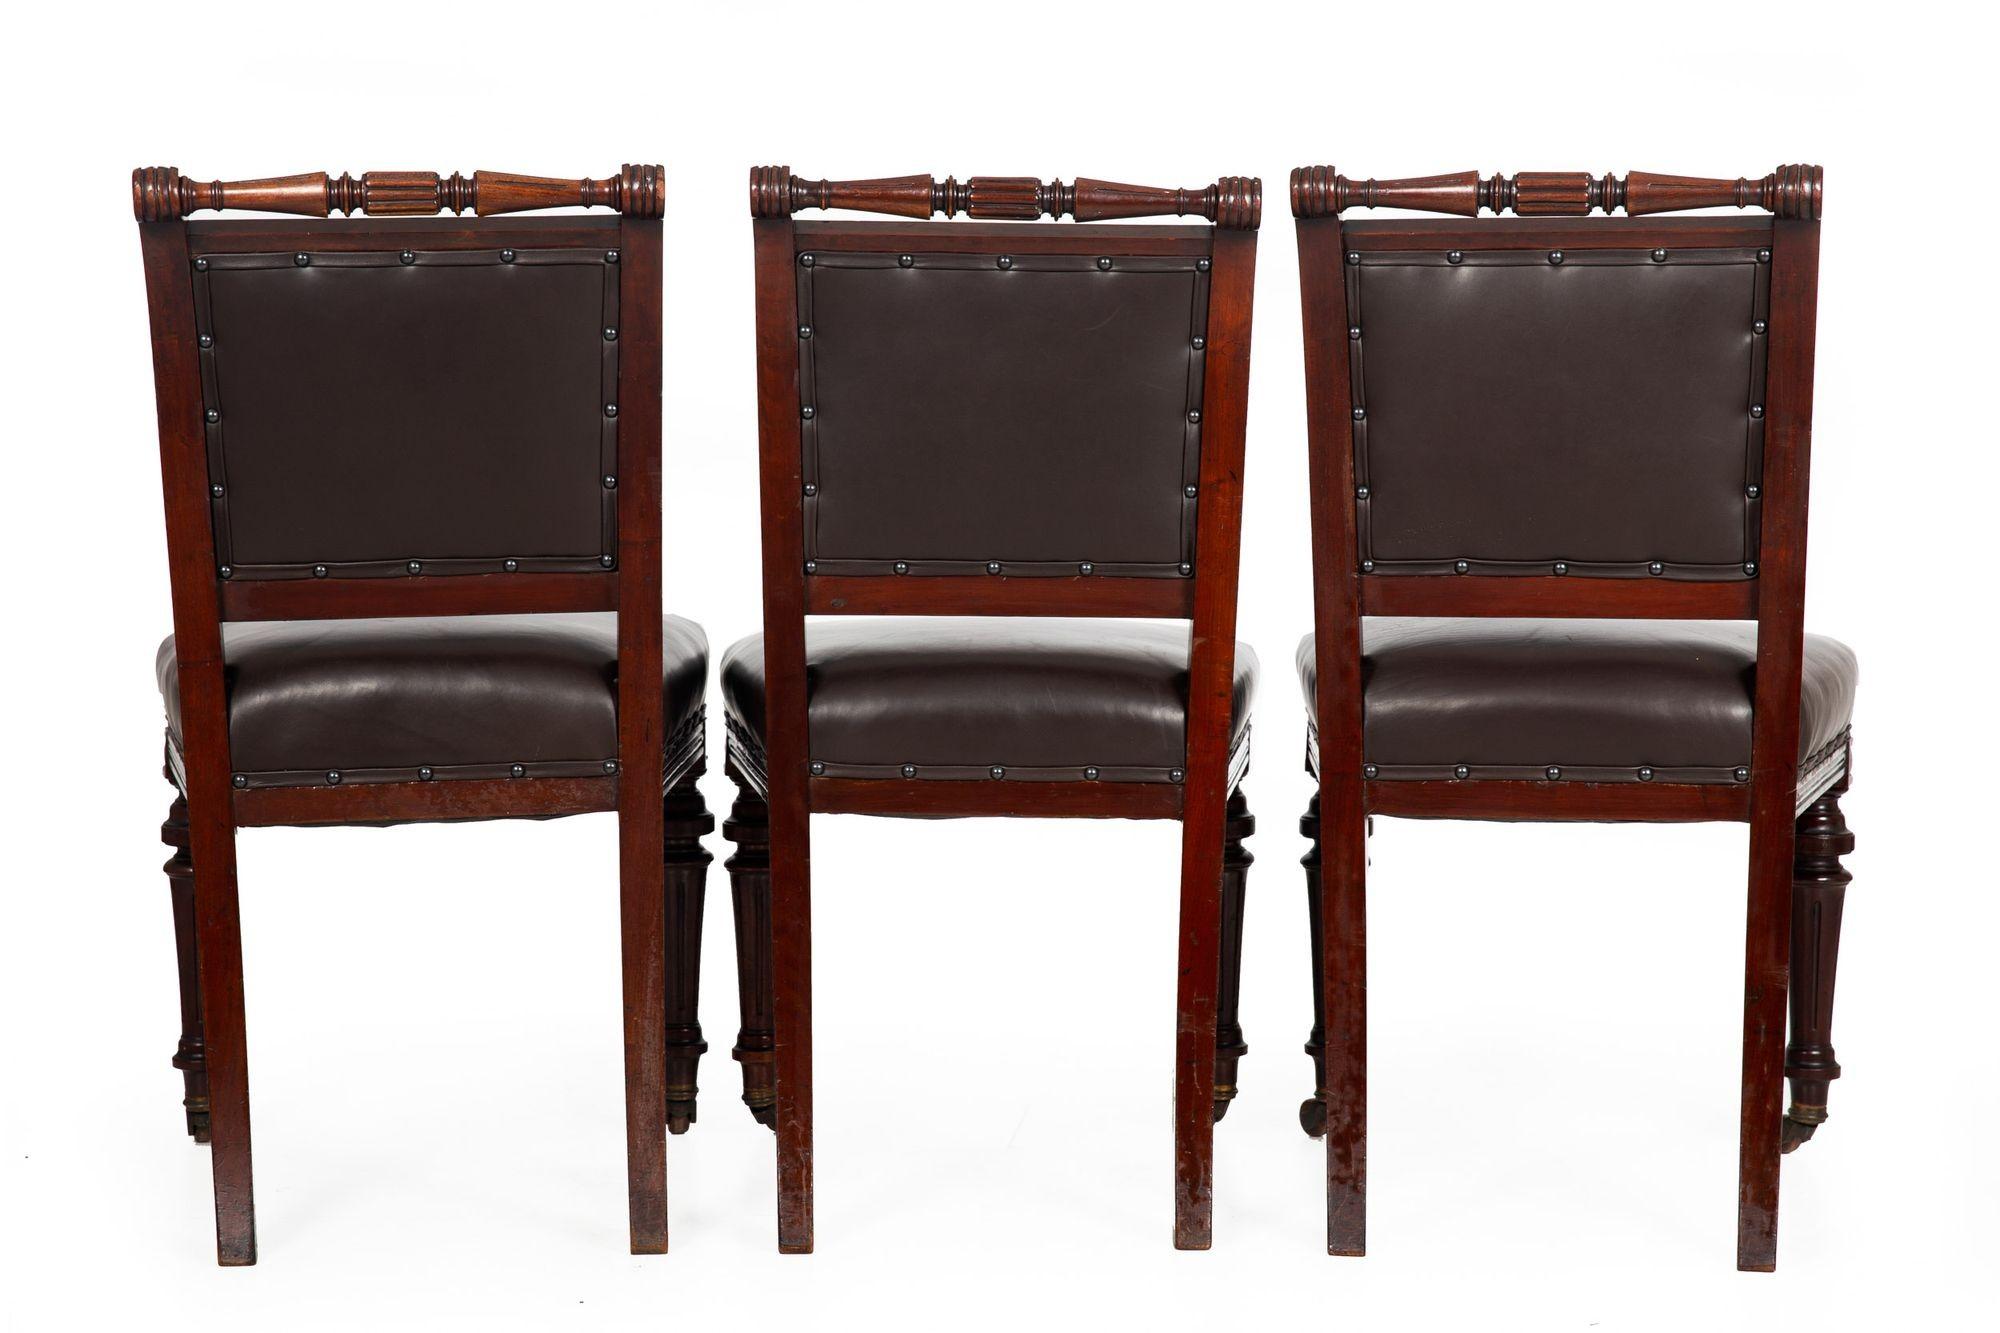 Set of 6 English Antique Mahogany and Leather Dining Chairs, 19th Century For Sale 5